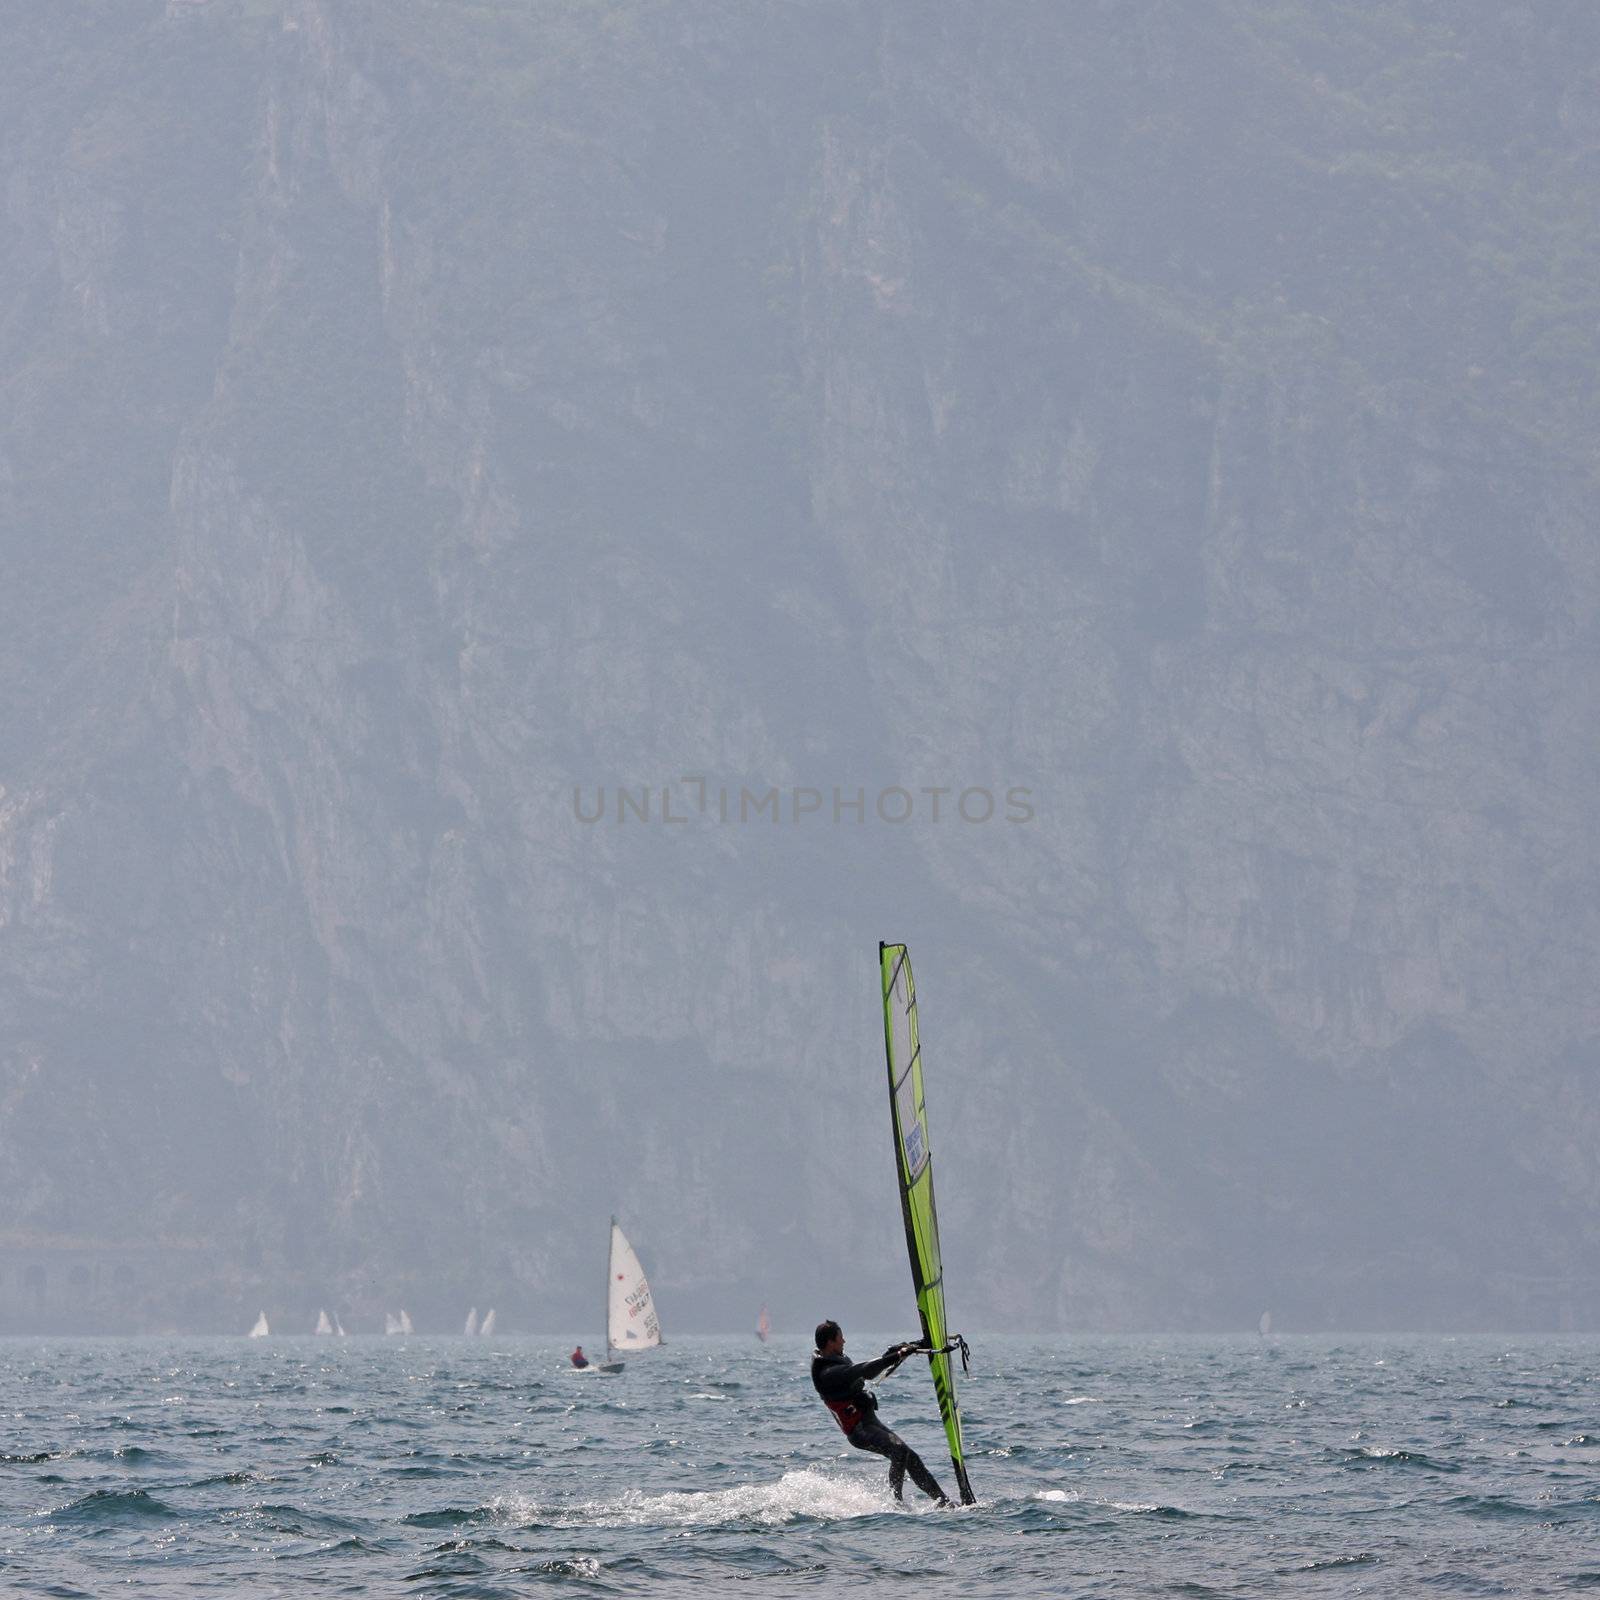 wind surfer at garda lake in italy by bernjuer